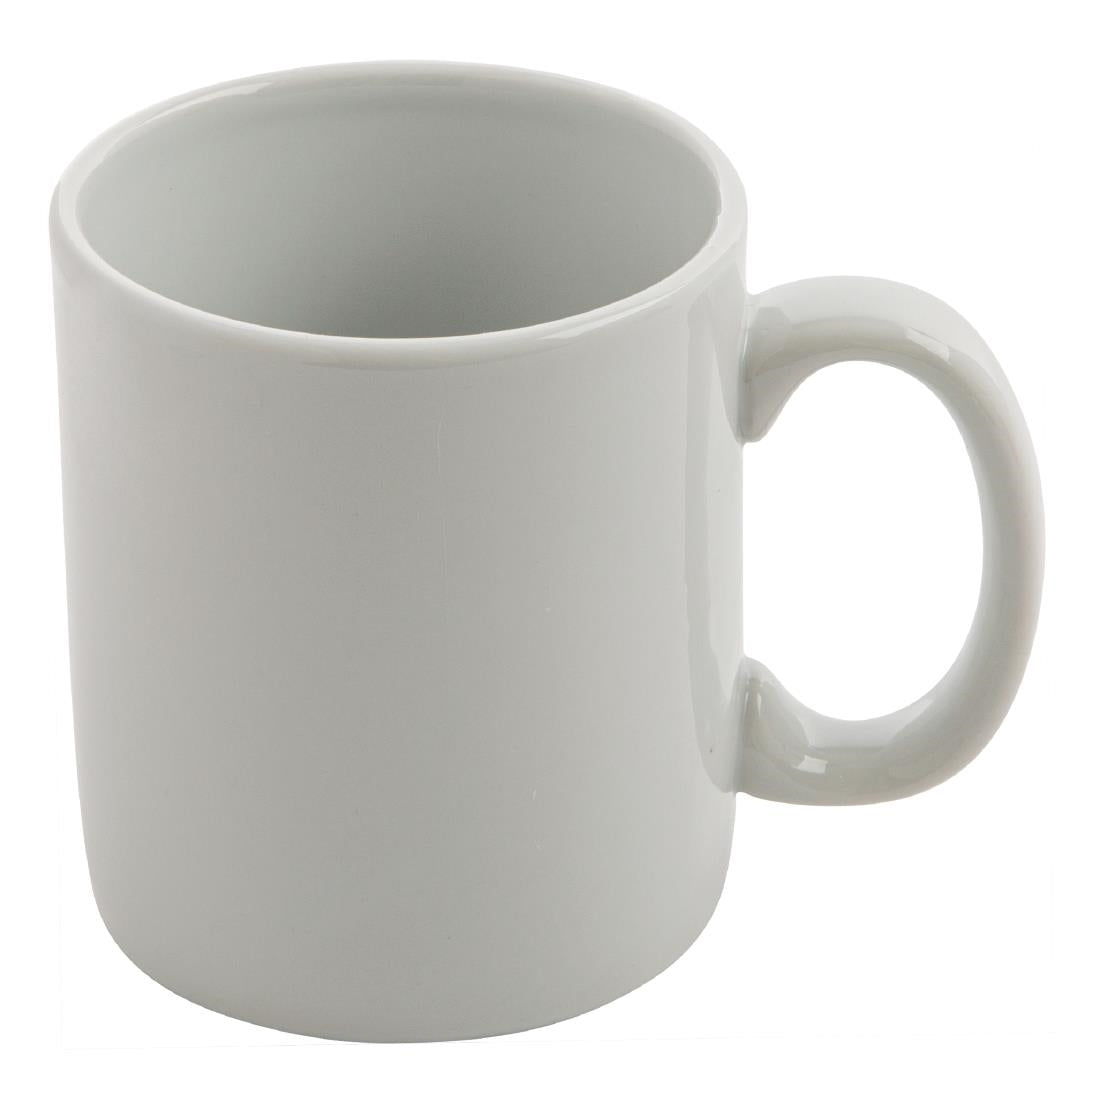 CC203 Athena Hotelware Mugs 10oz 280ml (Pack of 12) JD Catering Equipment Solutions Ltd